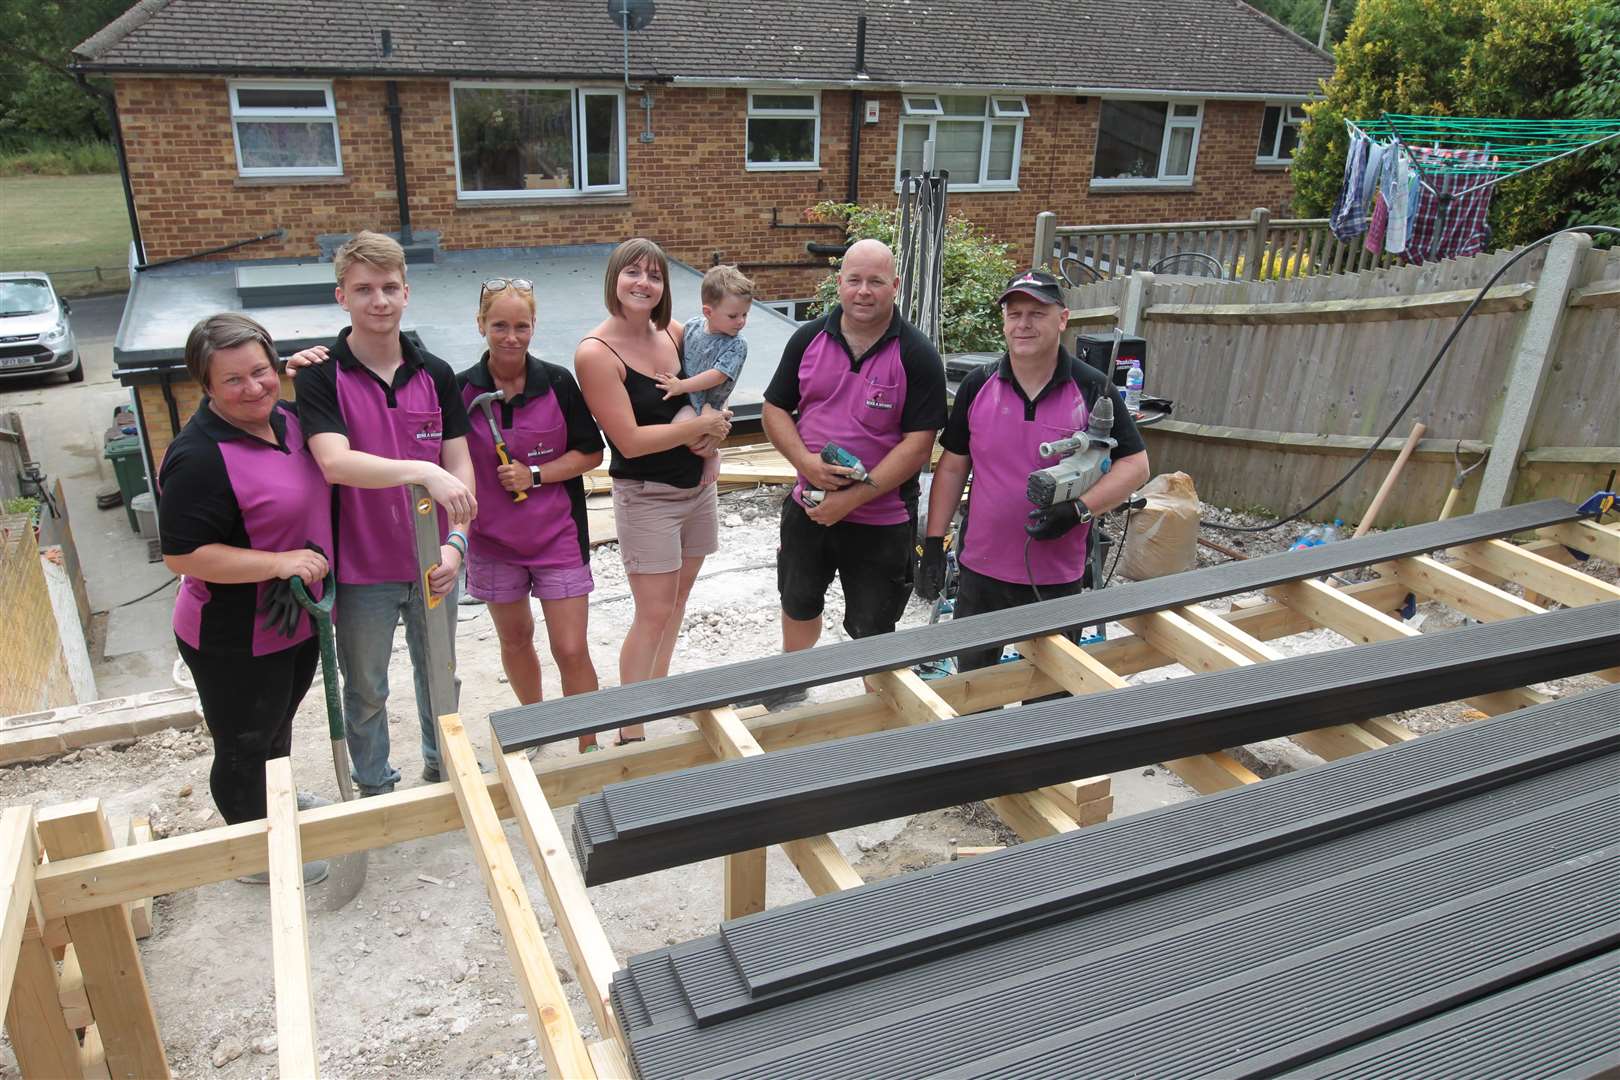 From left, Kirsty Selves with her son Louie, two, centre with Ilona Verba, Brencer Babrian, Sophie Opavszky, Imre Babrian and Paul Cartwright, two teams from Allington and Newington "Hire a Hubby" franchise helping to build decking for Trinity the disabled daughter of Kirsty, who was at school while the teams did the garden in the Chatham area. Picture by: John Westhrop. (2891711)